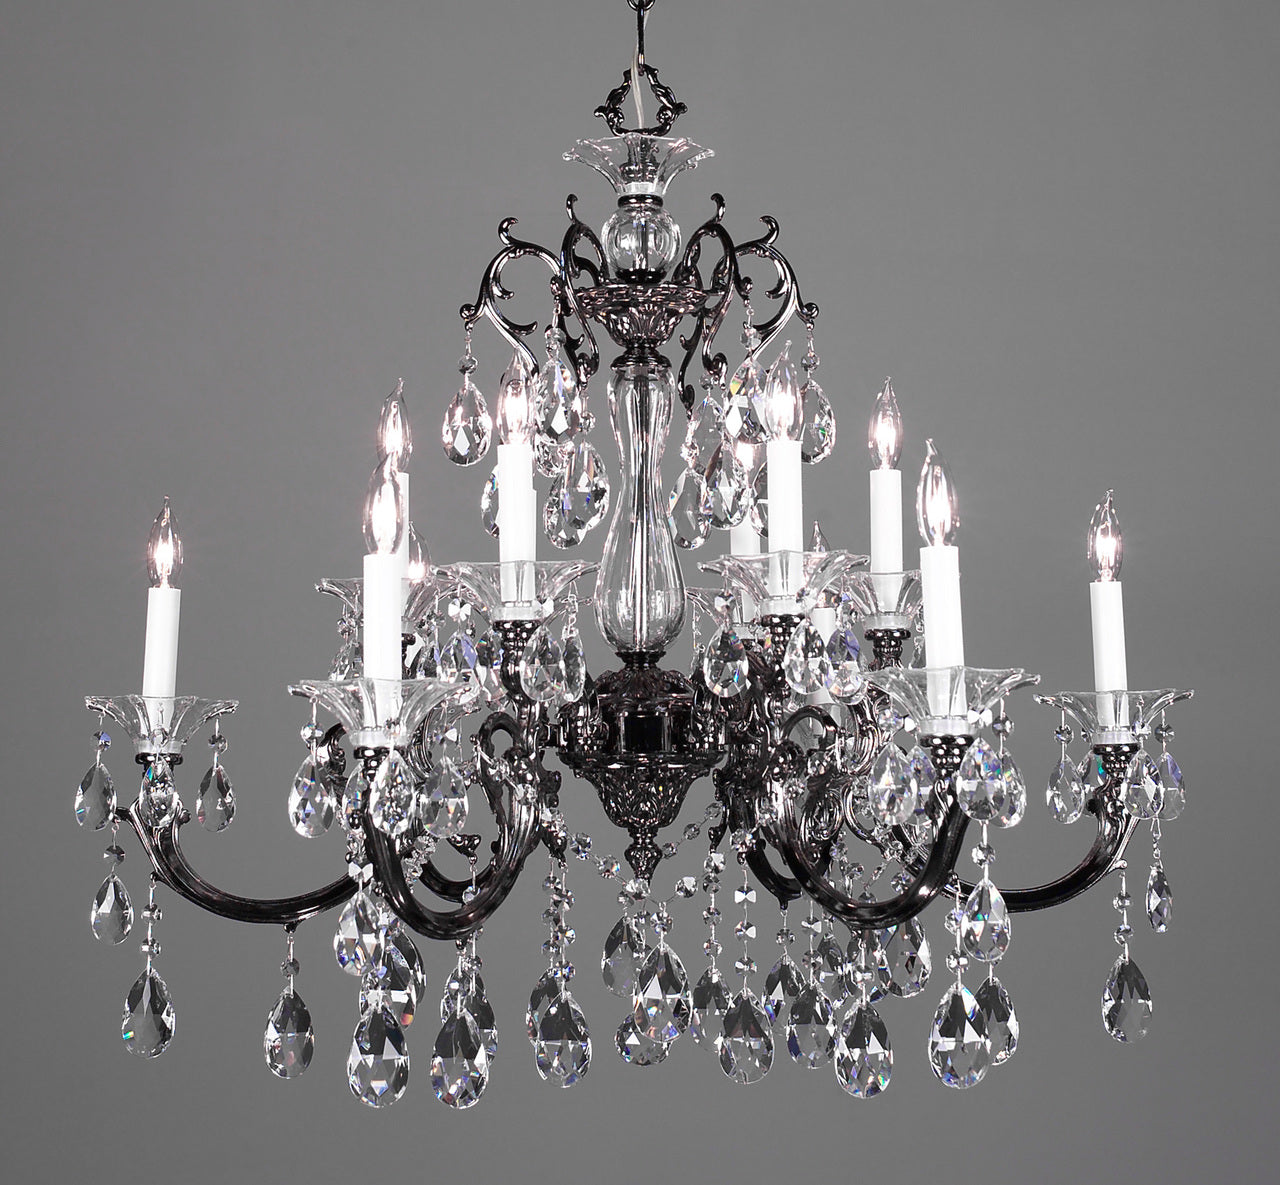 Classic Lighting 57063 CHP SC Via Lombardi Crystal Chandelier in Champagne Pearl (Imported from Spain)